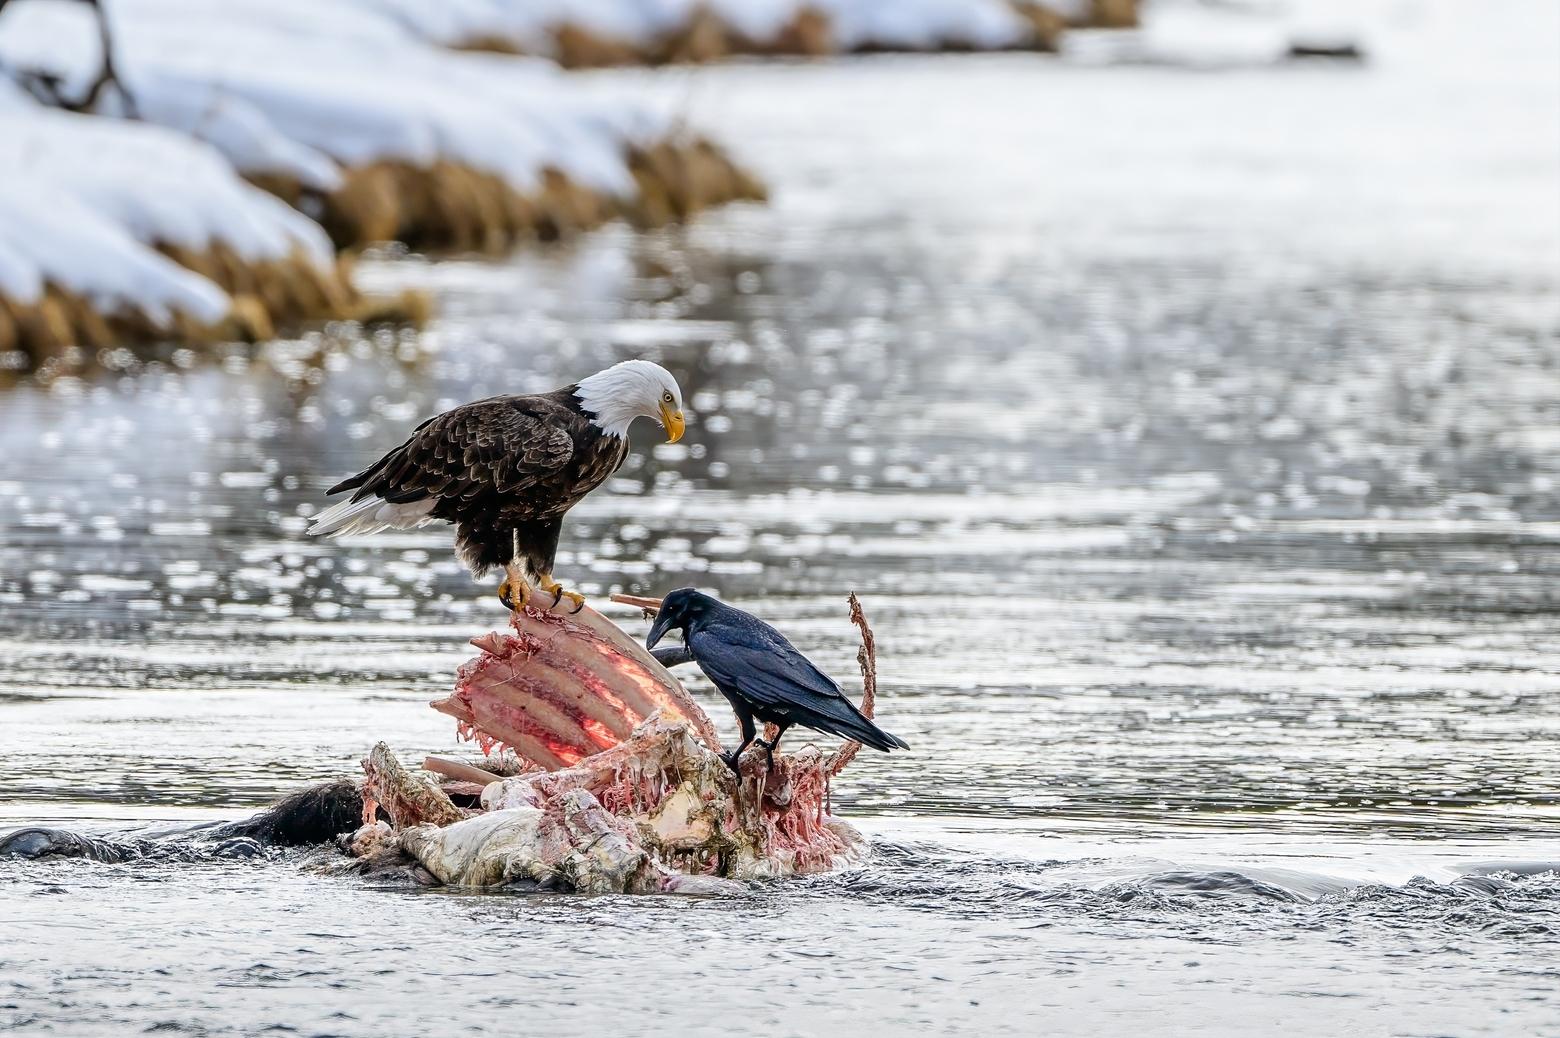 January 21. A bald eagle and ravens would be among the first visits to the carcass between wolf rounds.  